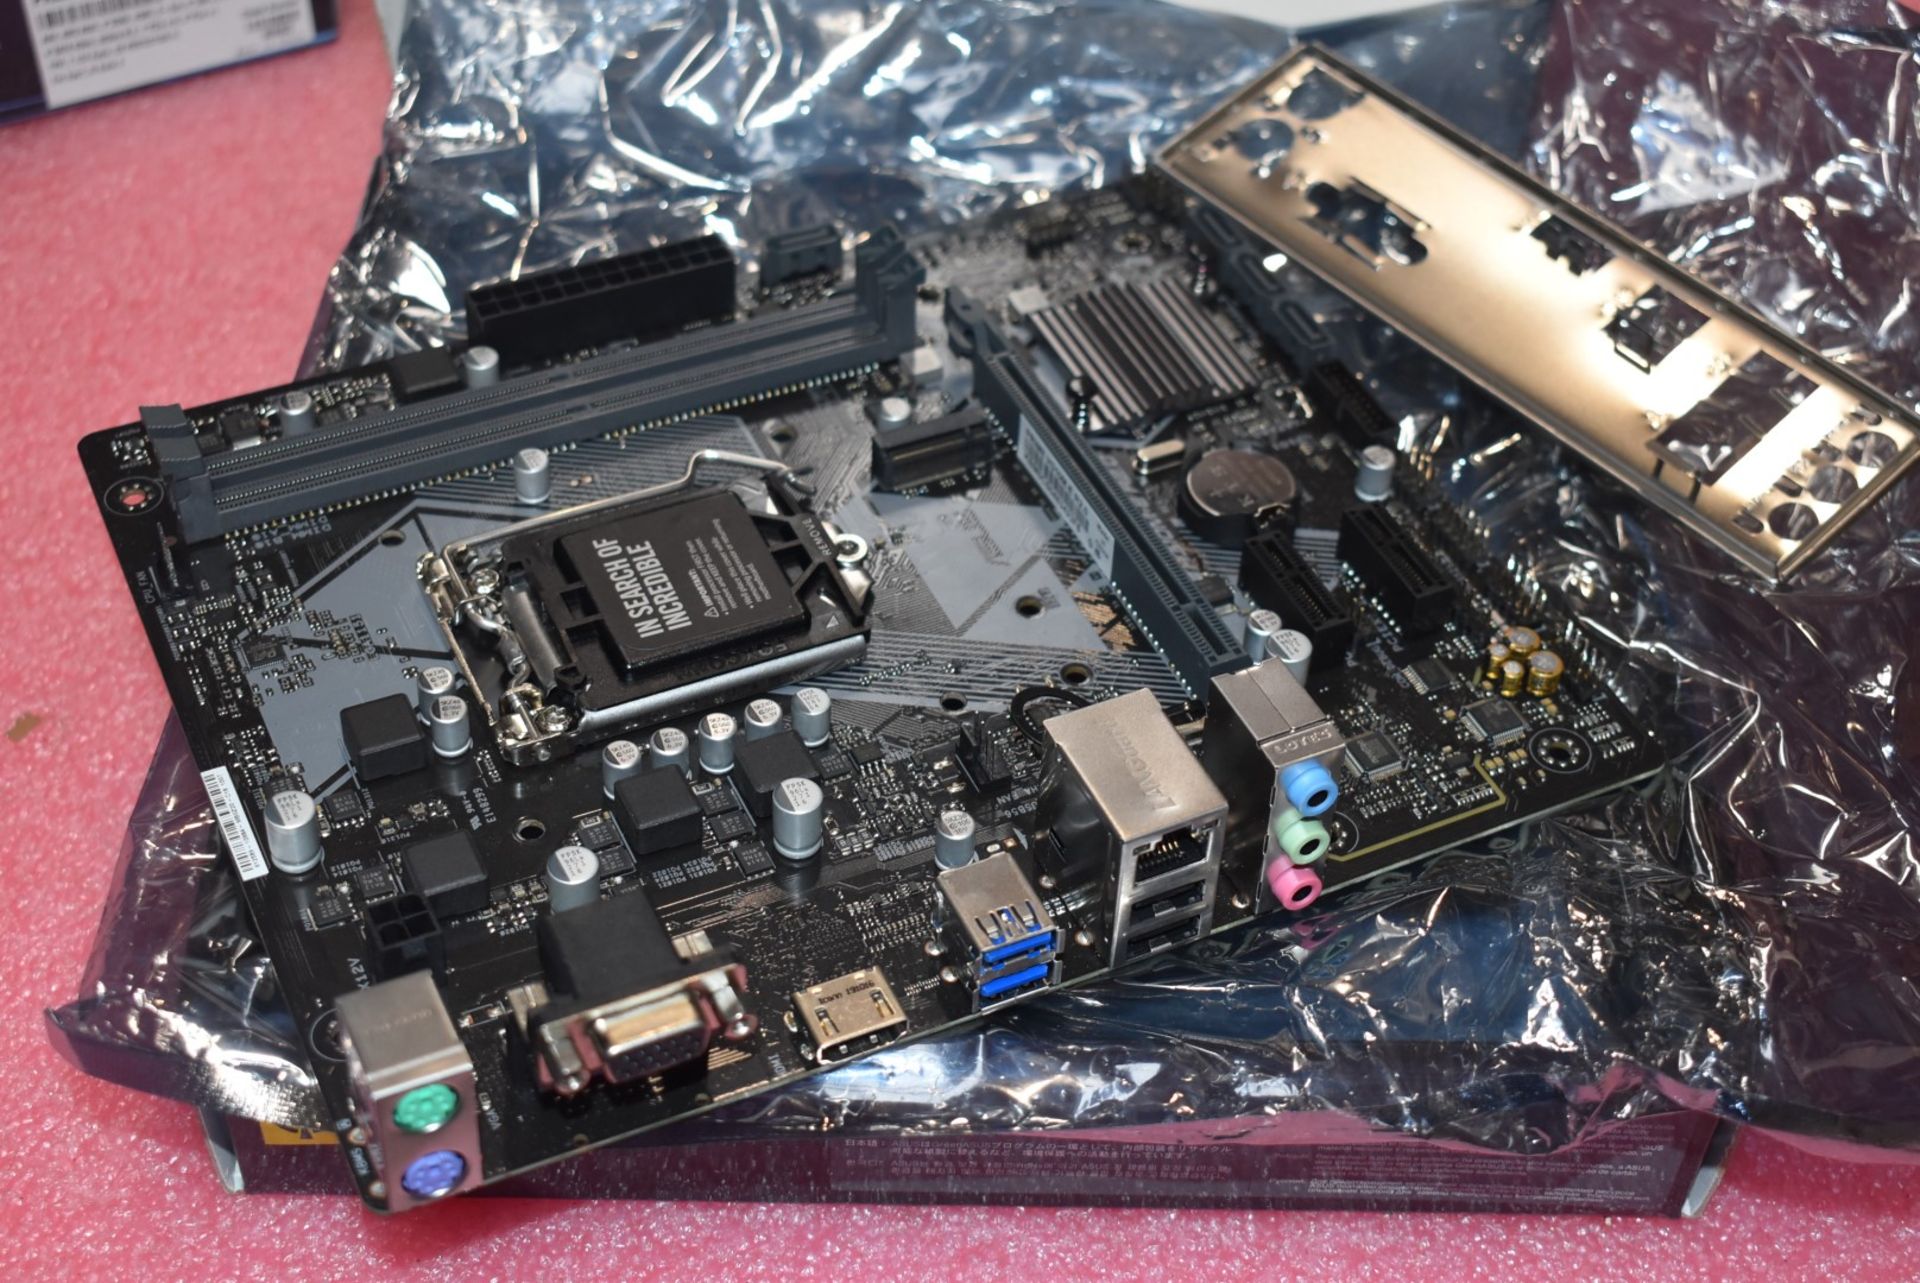 1 x Asus Prime H310M-E Intel LGA1151 Motherboard - Boxed With Accessories - Image 4 of 5